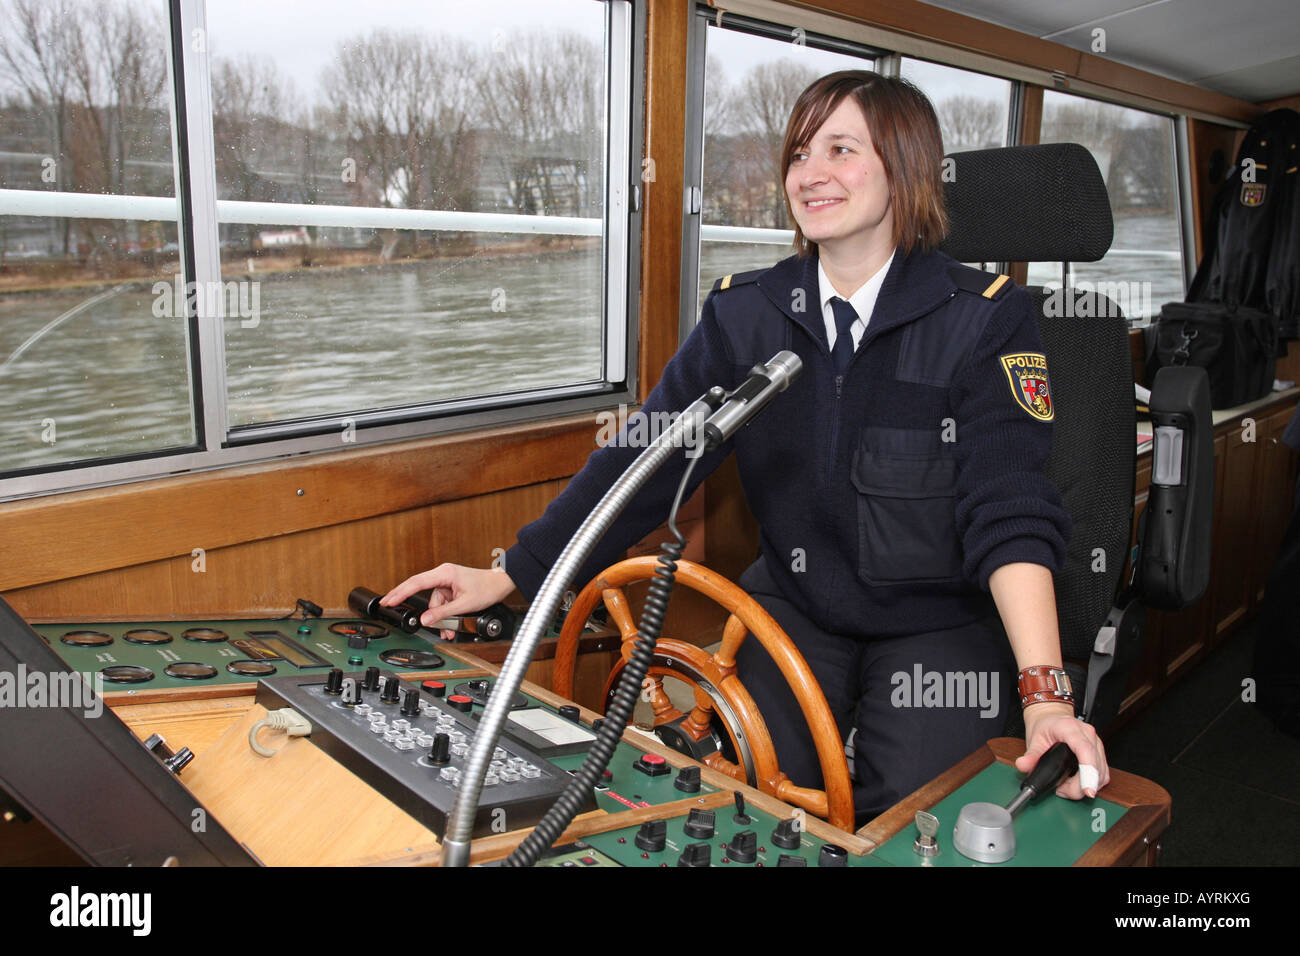 Police commissioner Katrin Pletsch at the wheel of the WSP 11 police boat on the Rhine River near Koblenz, Rhineland-Palatinate Stock Photo